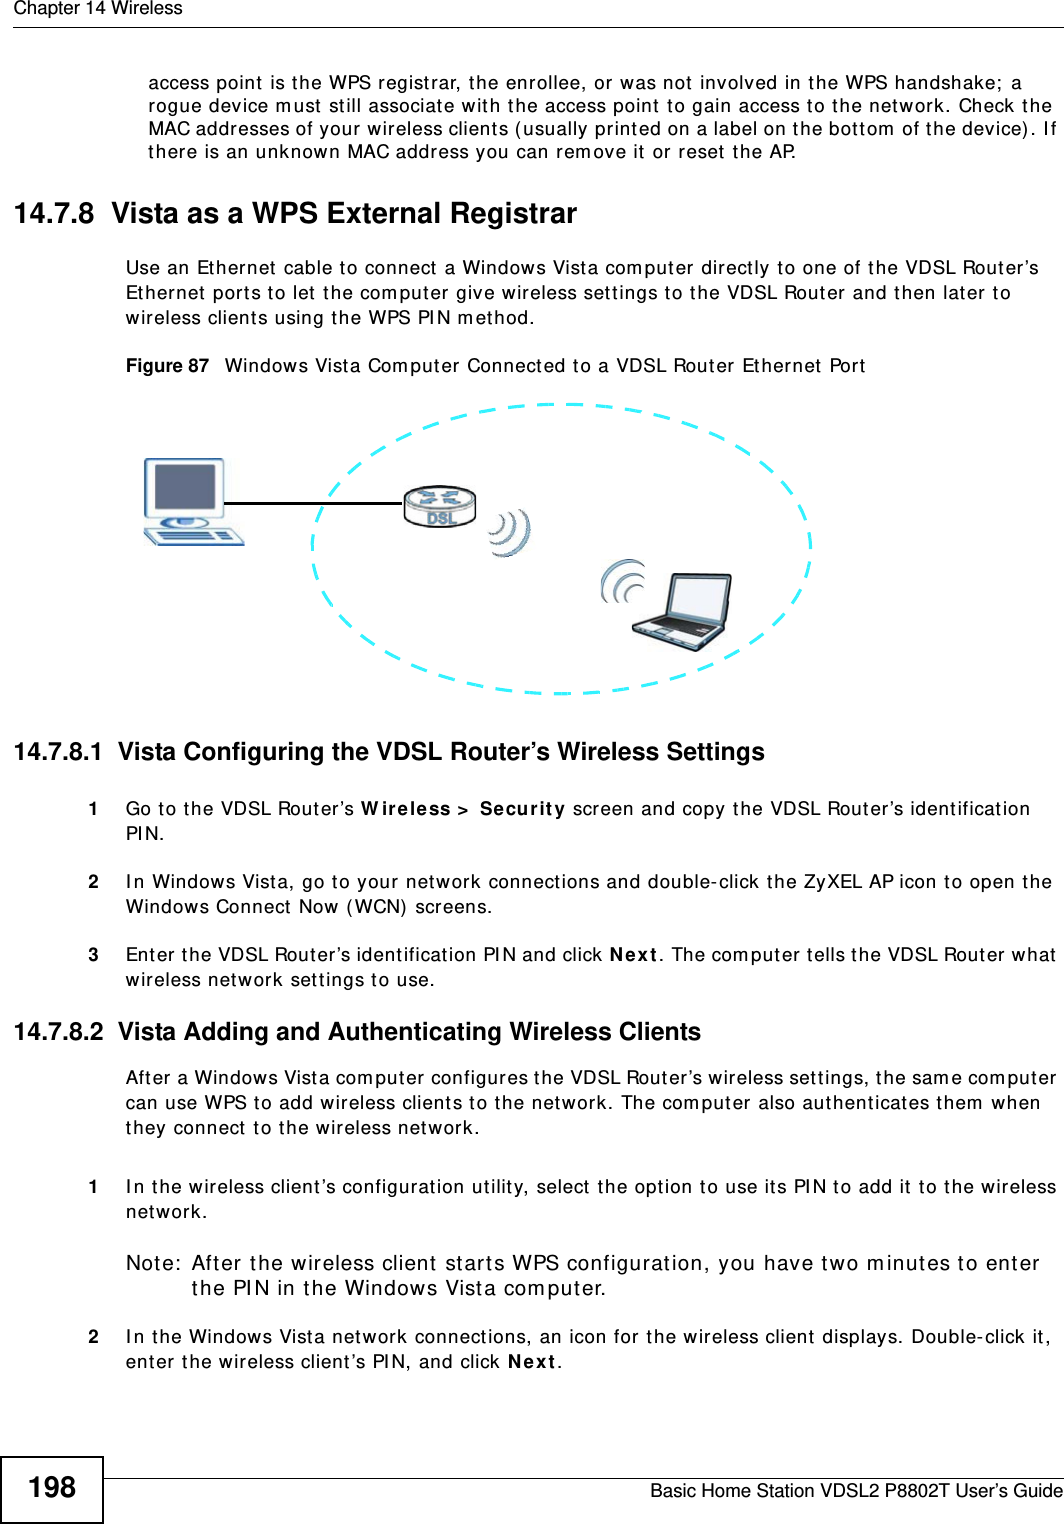 Chapter 14 WirelessBasic Home Station VDSL2 P8802T User’s Guide198access point is the WPS regist rar, the enrollee, or was not  involved in t he WPS handshake;  a rogue device m ust  st ill associate wit h the access point to gain access to the net work. Check the MAC addresses of your wireless clients ( usually print ed on a label on t he bott om  of t he device) . I f there is an unknown MAC address you can rem ove it or reset  t he AP. 14.7.8  Vista as a WPS External RegistrarUse an Ethernet  cable to connect a Windows Vist a com puter directly t o one of t he VDSL Router’s Et hernet ports t o let the com put er give wireless set t ings t o the VDSL Router and then lat er to wireless client s using t he WPS PI N m ethod. Figure 87   Windows Vista Com put er  Connect ed to a VDSL Rout er Et hernet  Port14.7.8.1  Vista Configuring the VDSL Router’s Wireless Settings1Go t o t he VDSL Router’s W ire less &gt;  Secu rit y scr een and copy the VDSL Router’s ident ification PI N. 2I n Windows Vist a, go to your network connections and double-click t he ZyXEL AP icon t o open t he Windows Connect Now (WCN)  screens. 3Enter t he VDSL Router’s ident ification PI N and click N e x t . The com puter tells t he VDSL Router what  wireless net work set t ings to use.14.7.8.2  Vista Adding and Authenticating Wireless ClientsAft er a Windows Vist a com put er configures the VDSL Rout er’s wireless set t ings, the sam e com puter  can use WPS to add wireless client s t o t he network. The com puter  also authenticat es them  when they connect  t o t he wireless net work.  1I n the wireless client ’s configurat ion utility, select  t he opt ion to use its PI N t o add it  t o t he wireless net work. Note:  Aft er t he wireless client st arts WPS configurat ion, you have t wo m inutes t o ent er the PI N in t he Windows Vist a com puter. 2I n the Windows Vista net work connect ions, an icon for the wireless client  displays. Double- click it, ent er t he wireless client ’s PI N, and click N e x t . 